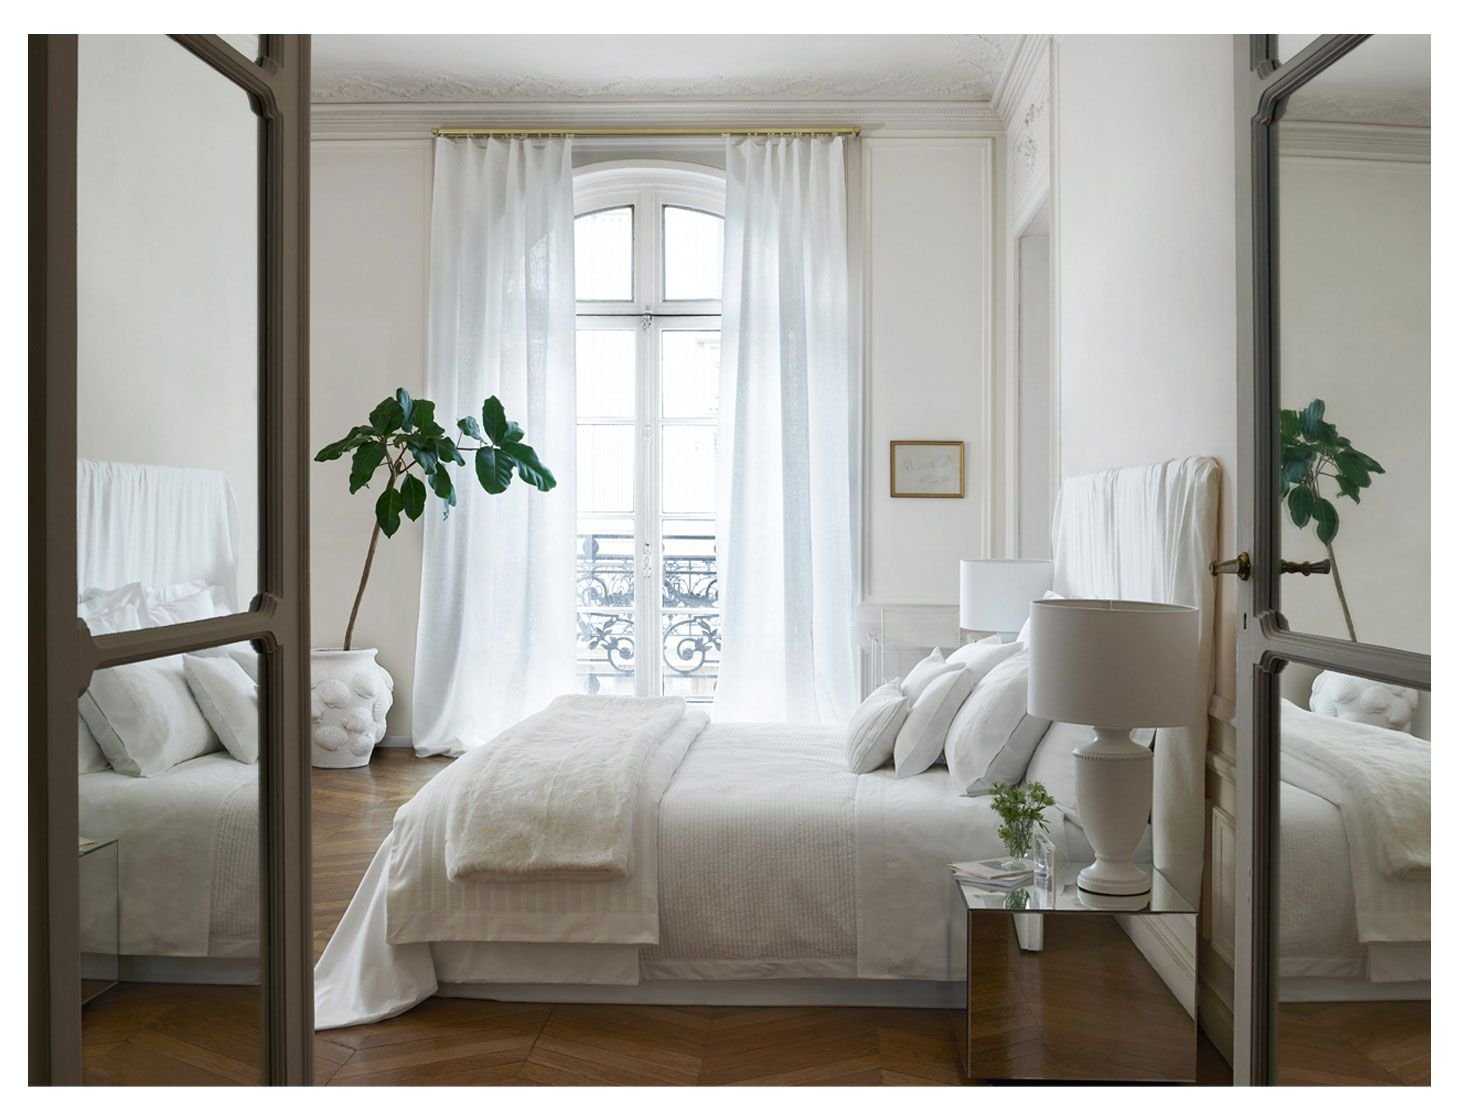 Parisian chic in the bedroom French style